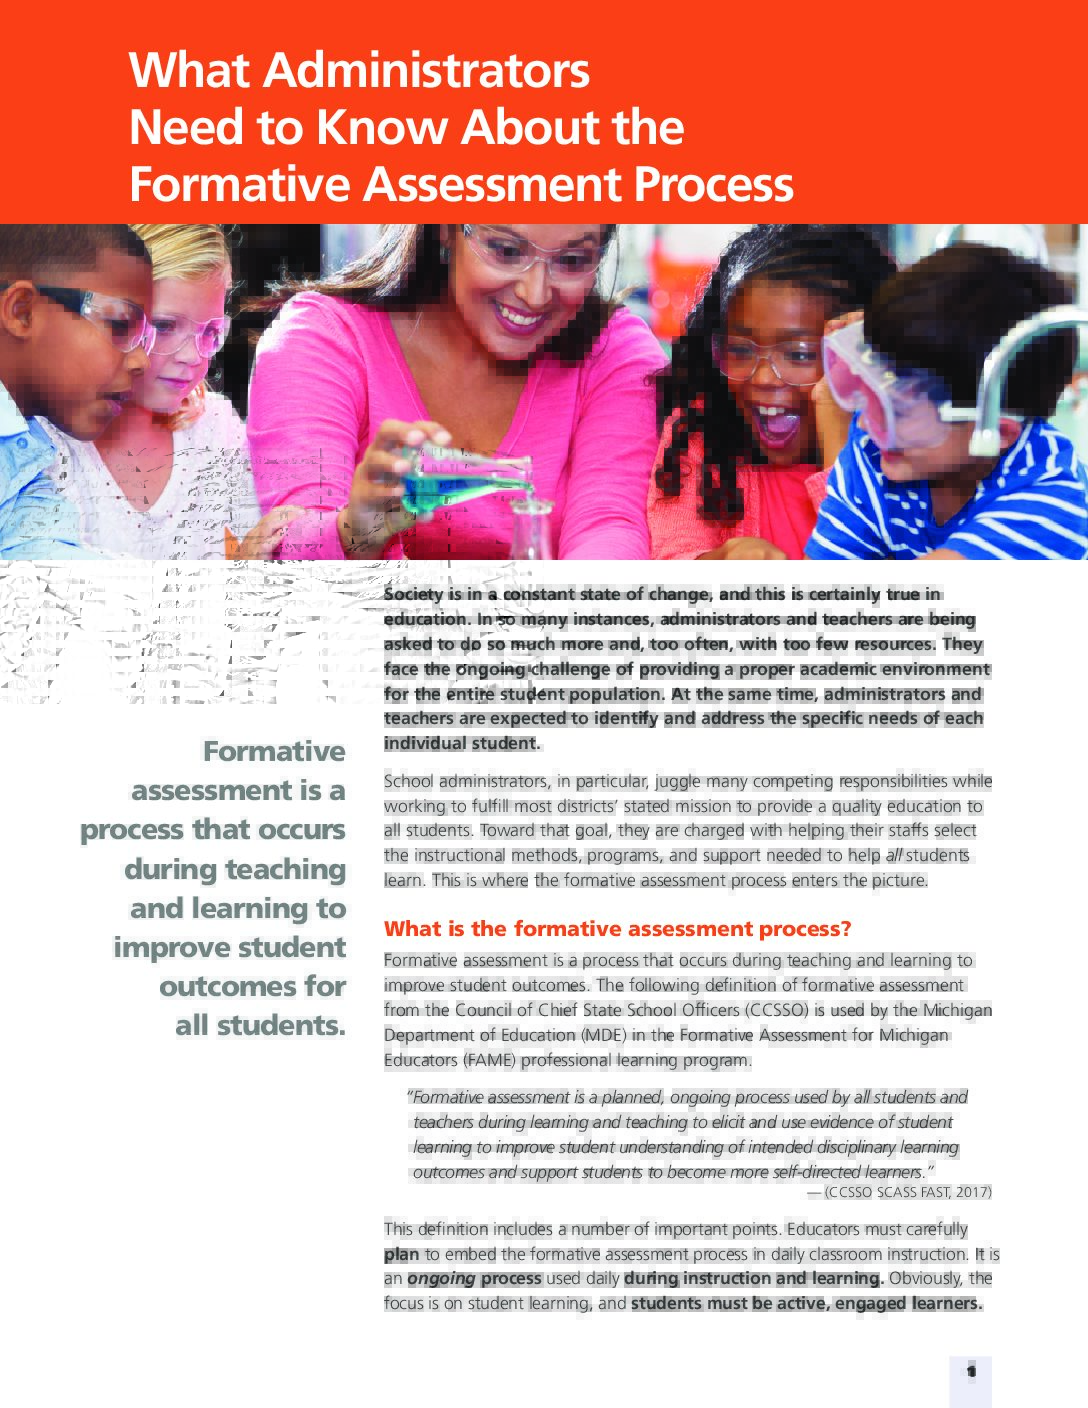 What Administrators Need to Know about the Formative Assessment Process Thumbnail